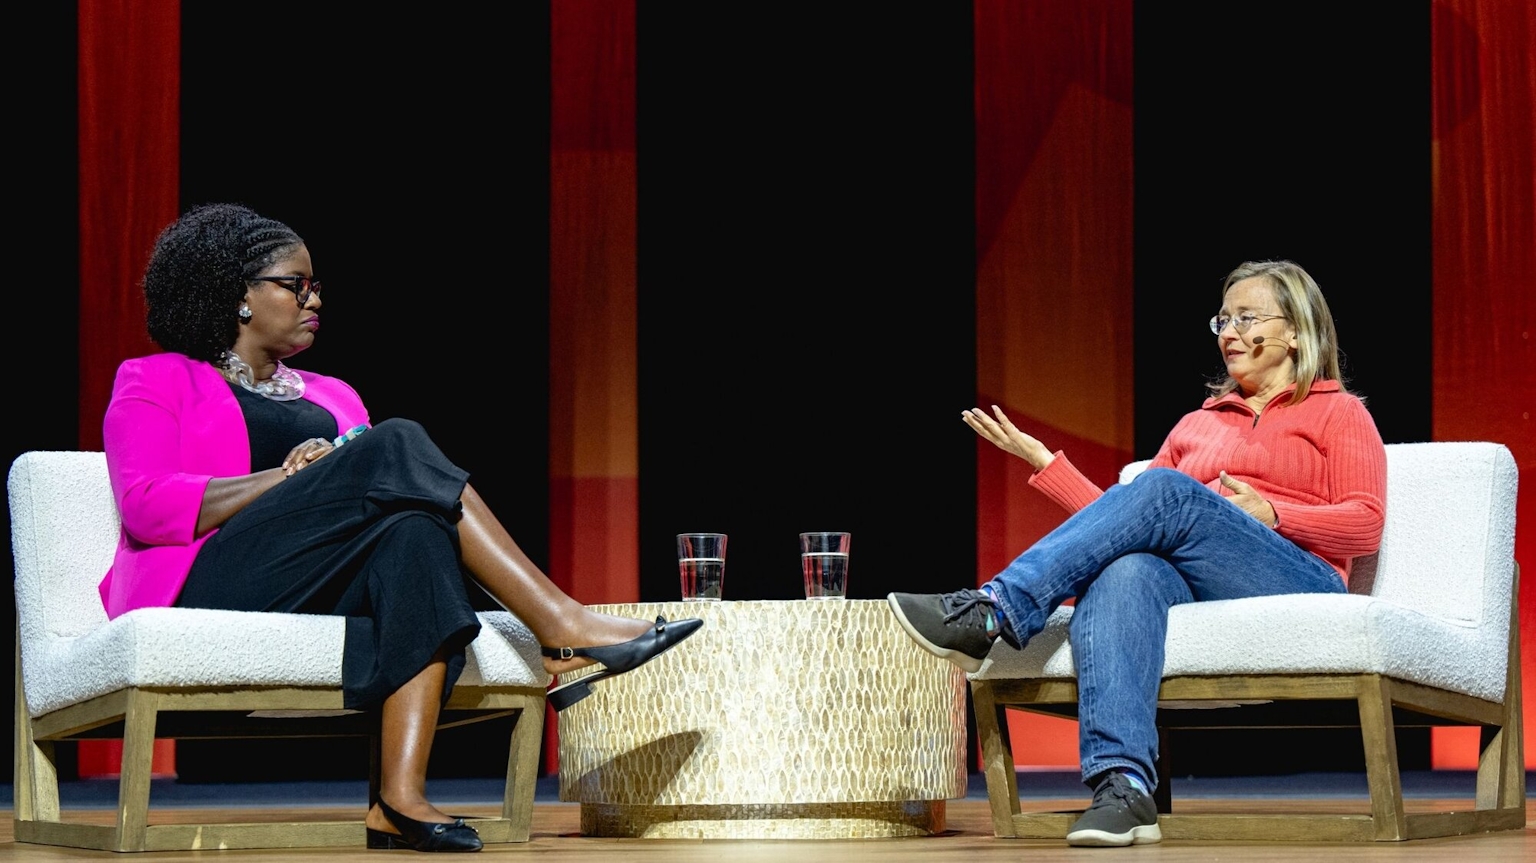 Two people in conversation on stage.